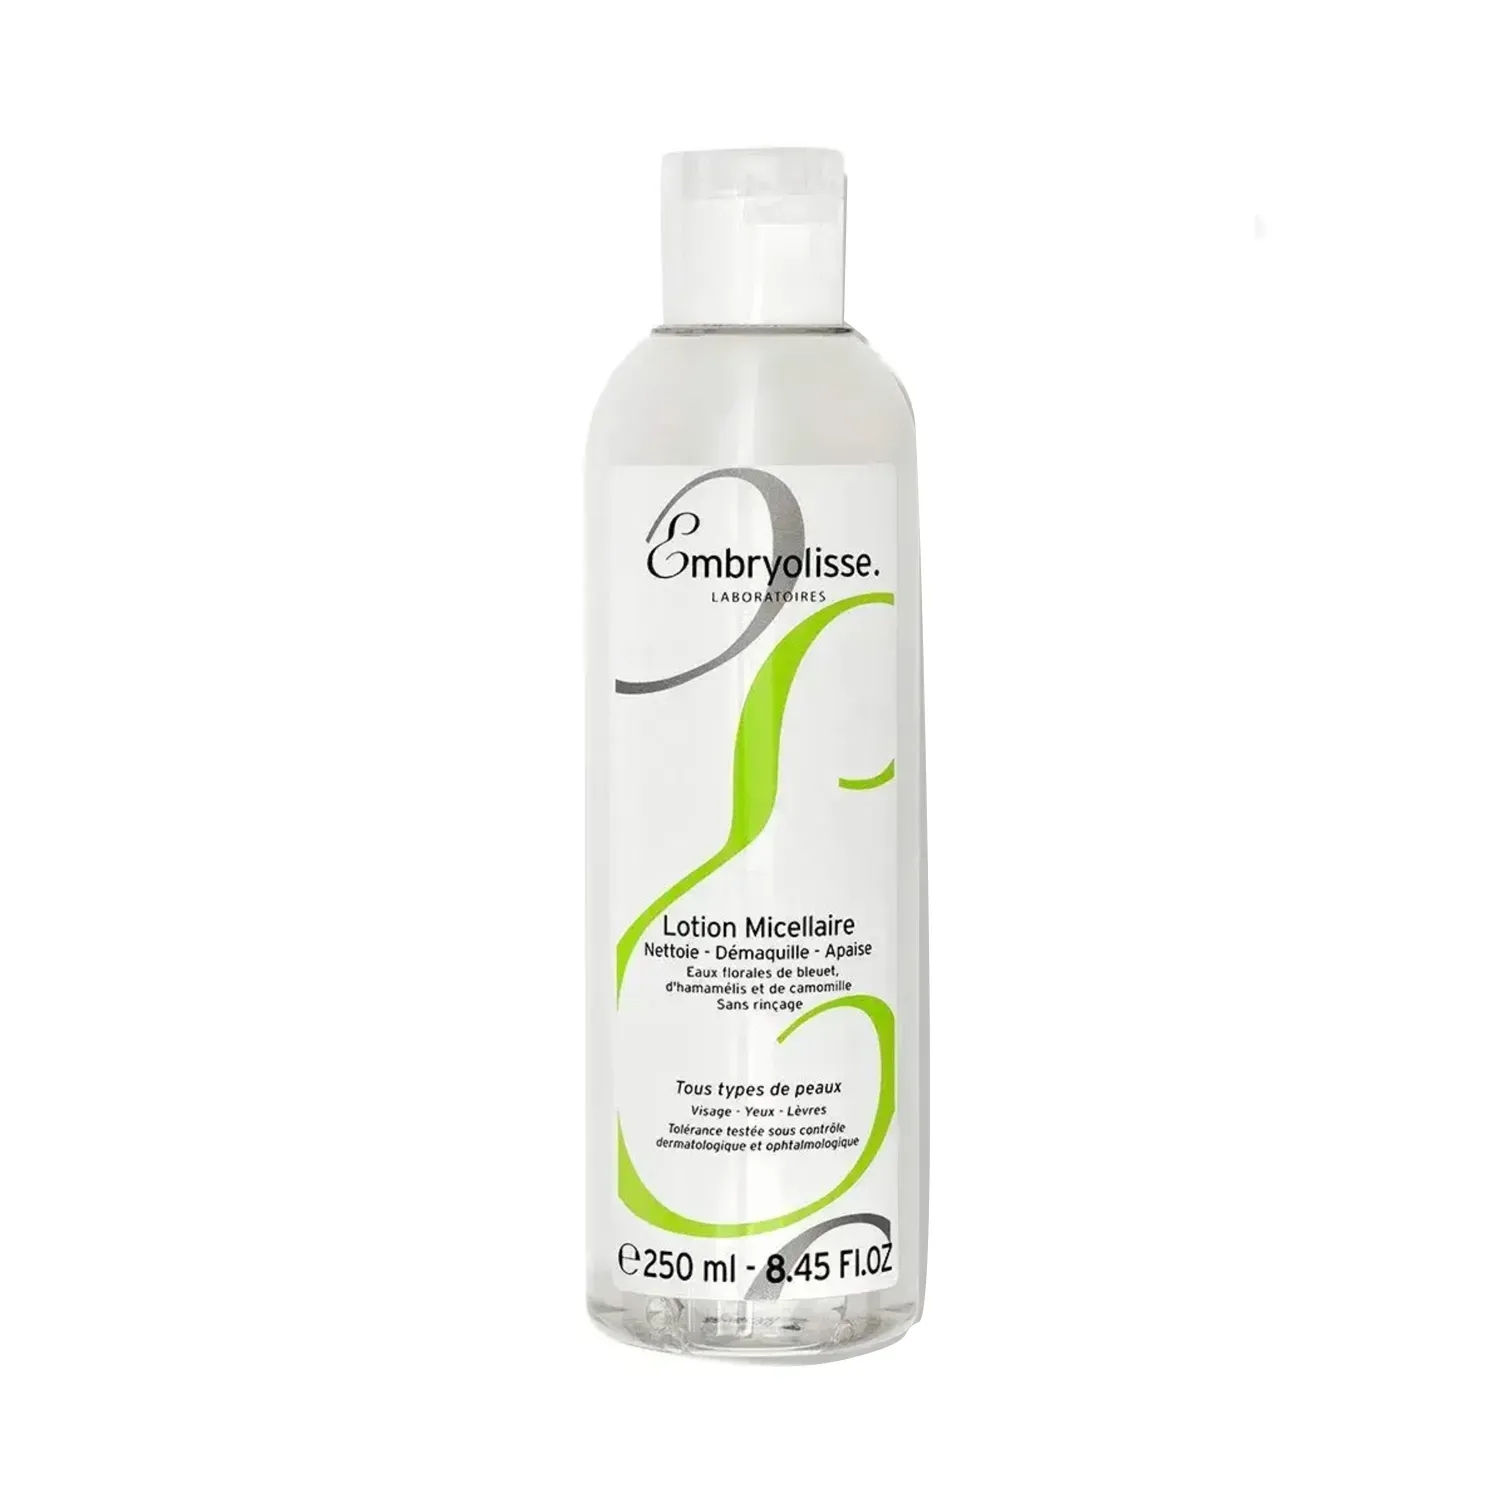 Embryolisse | Embryolisse Micellar Makeup Remover Lotion (250ml)